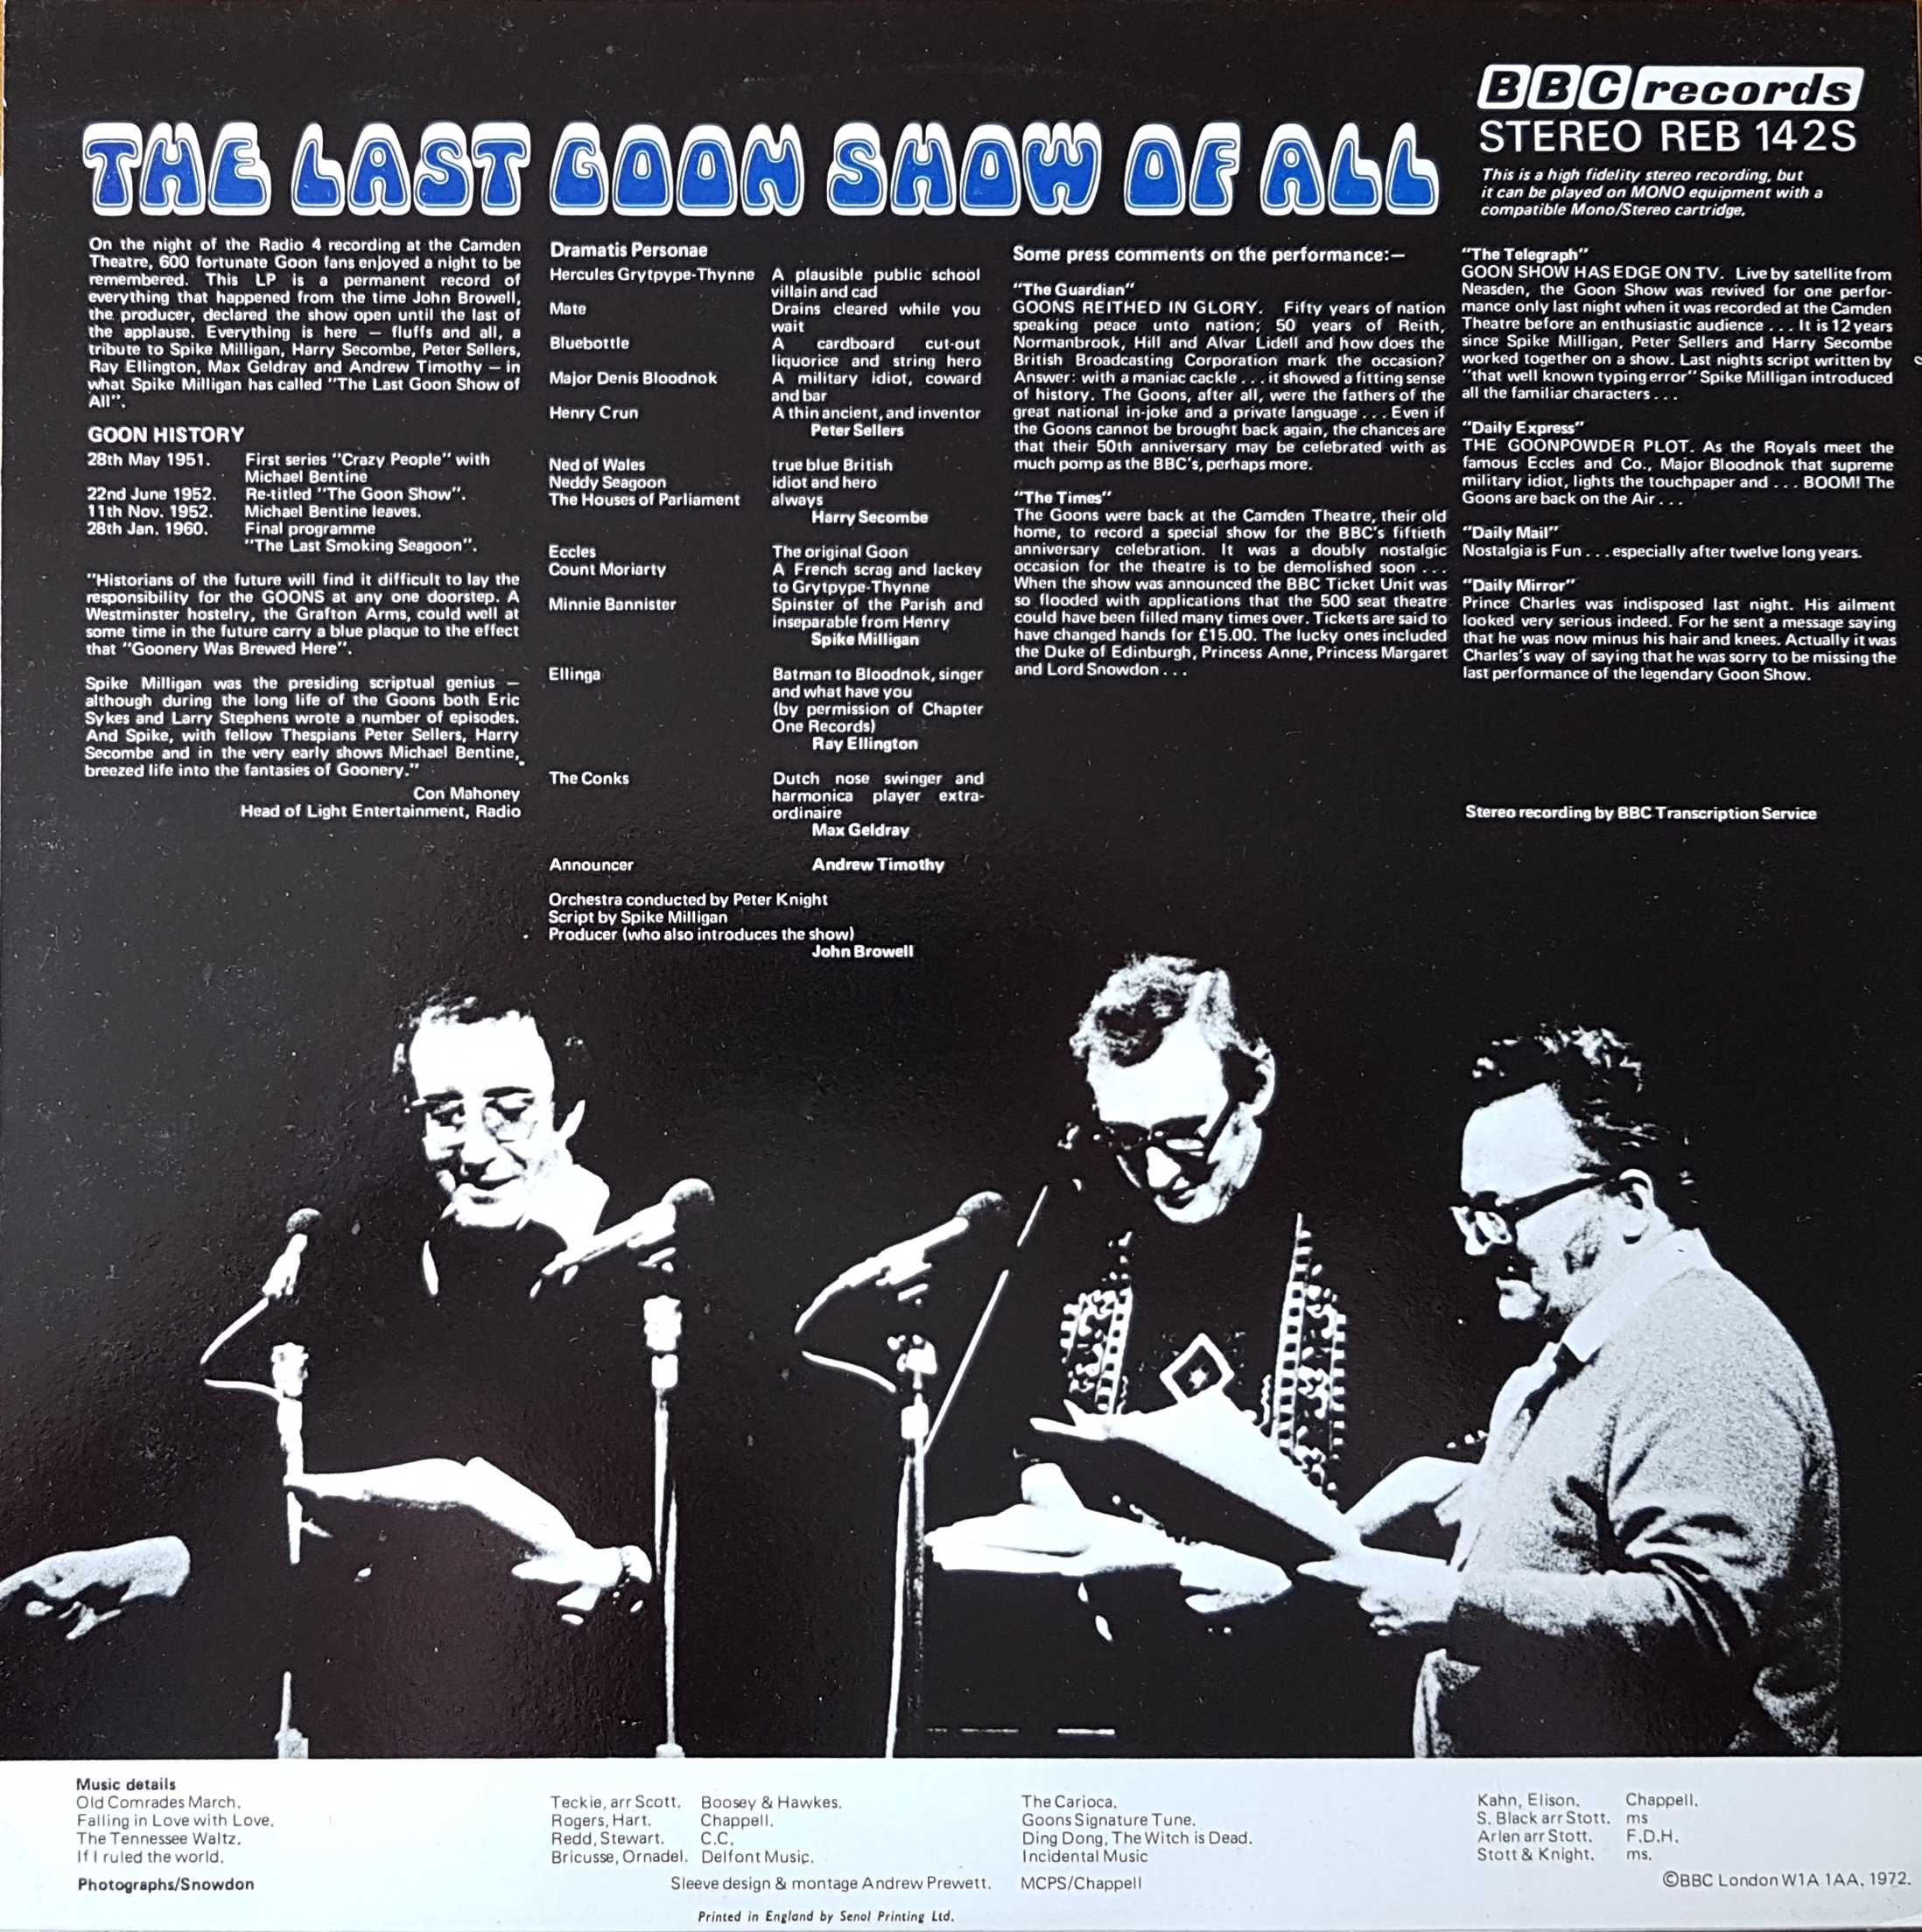 Picture of REB 142 The last Goon show of all by artist Spike Milligan from the BBC records and Tapes library